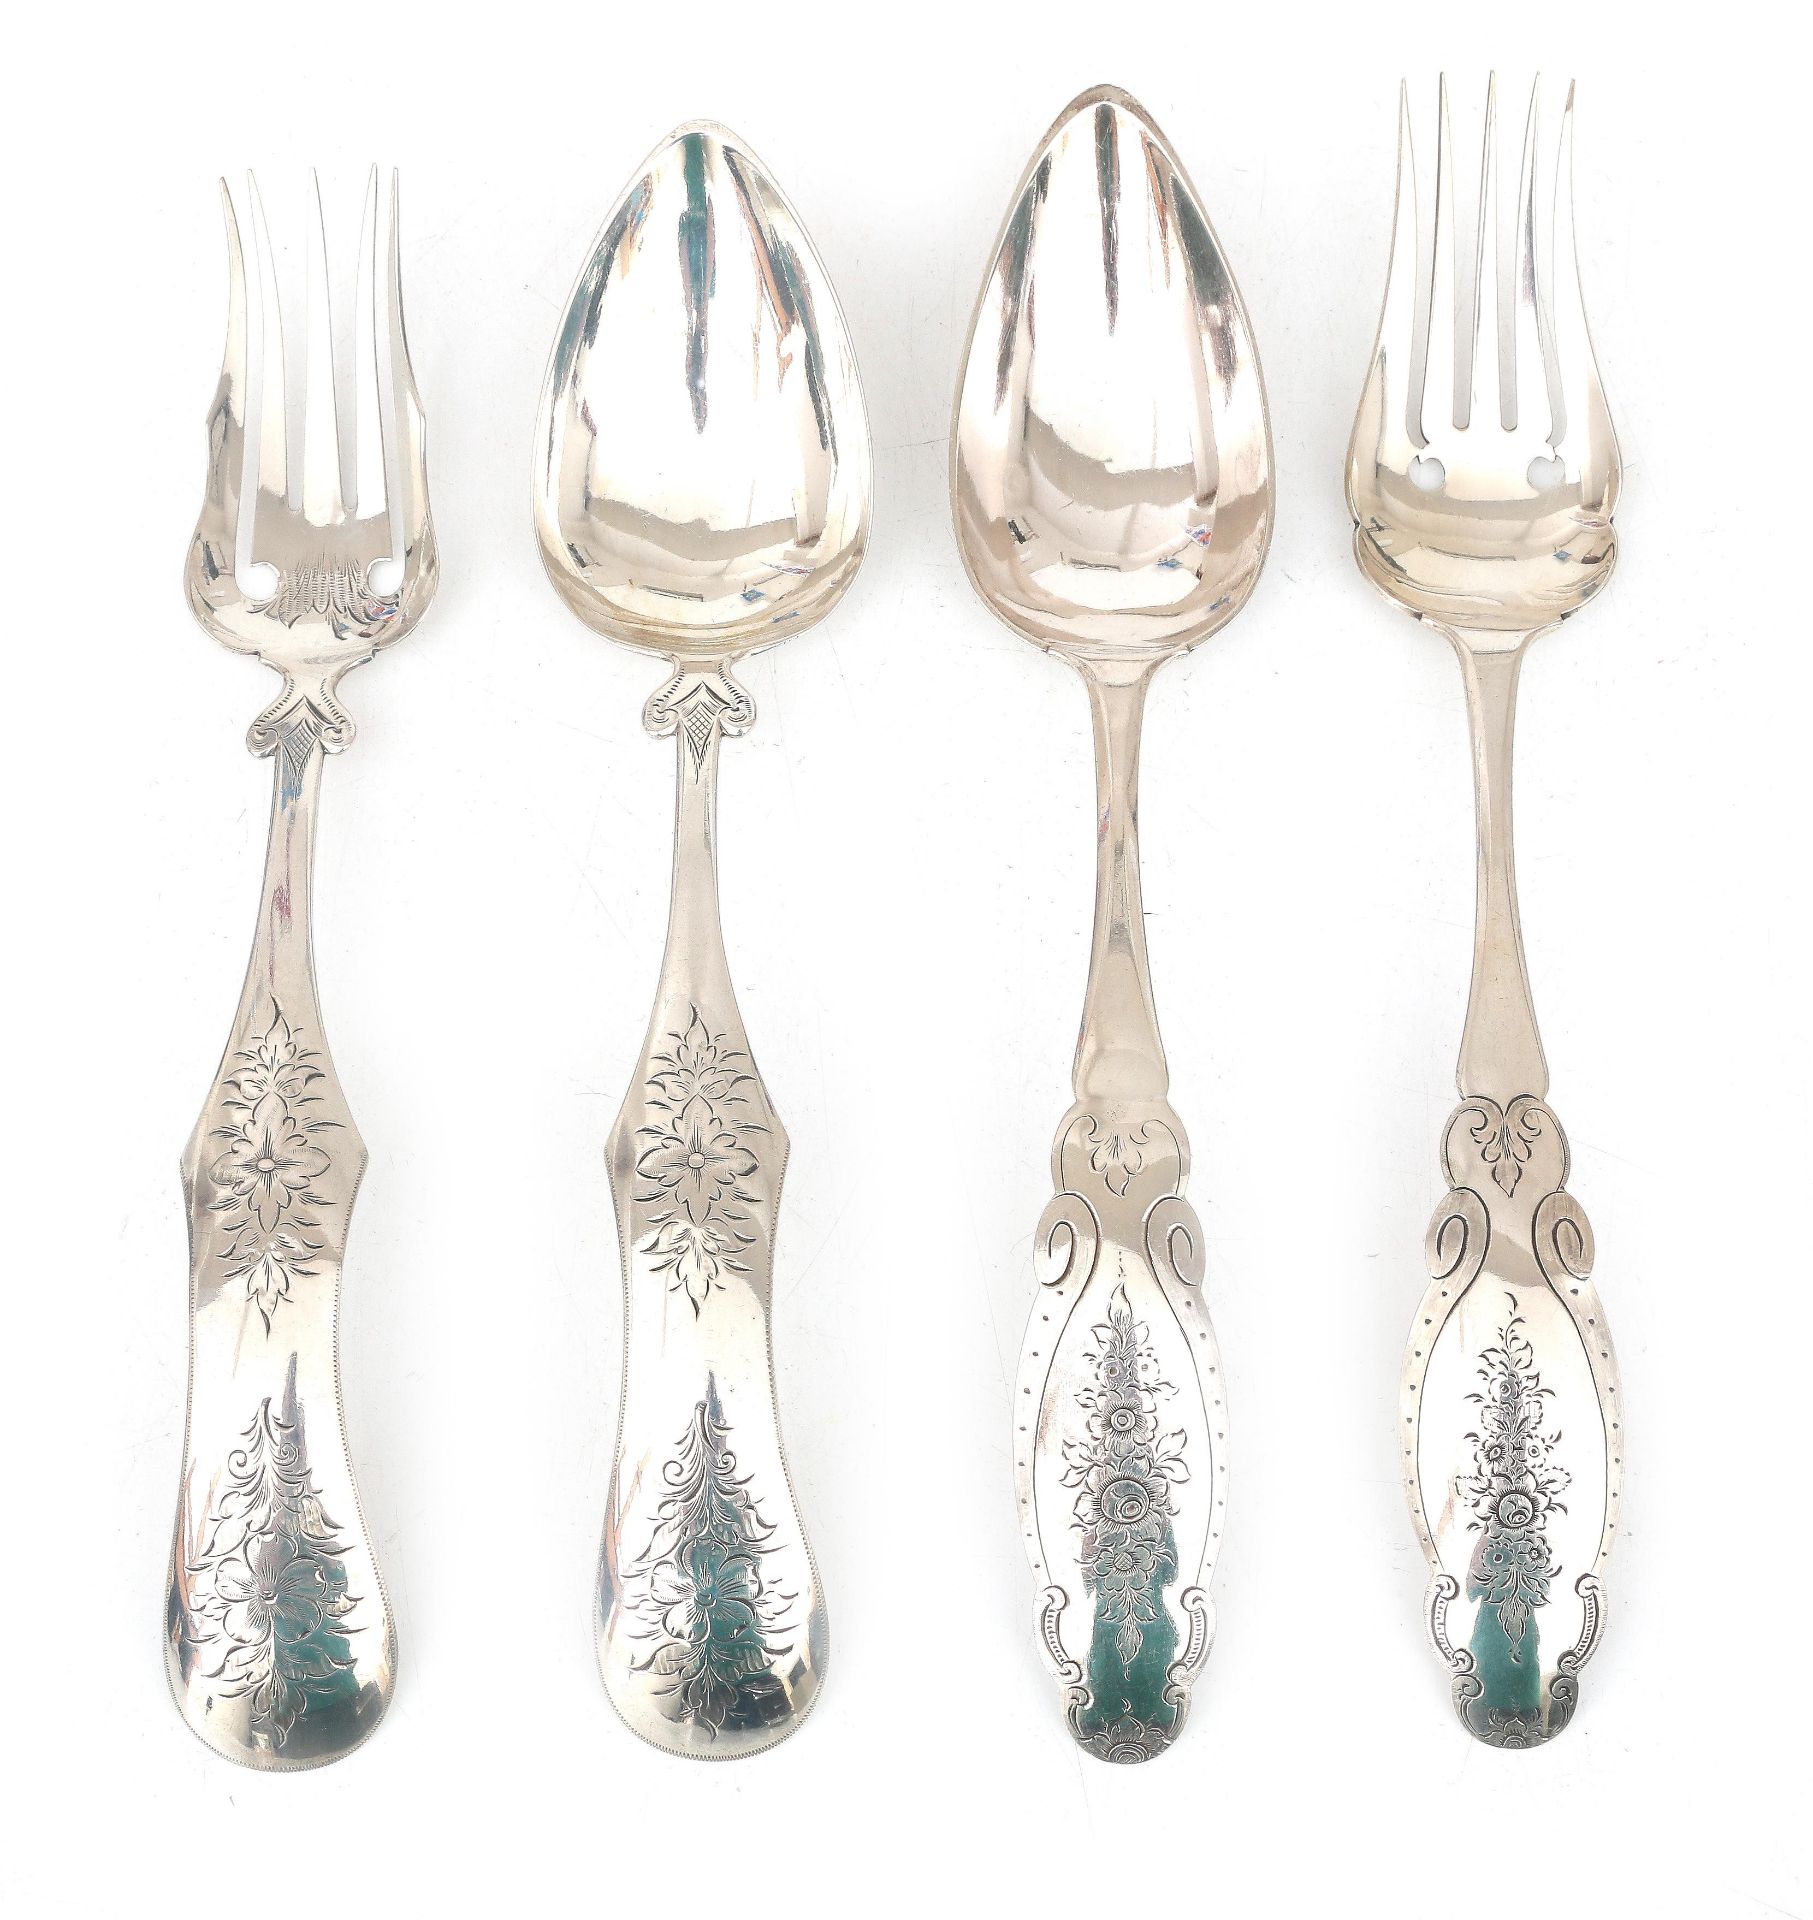 Two 835 silver server cutlery sets with floral engraved decoration, Holland, 1866.